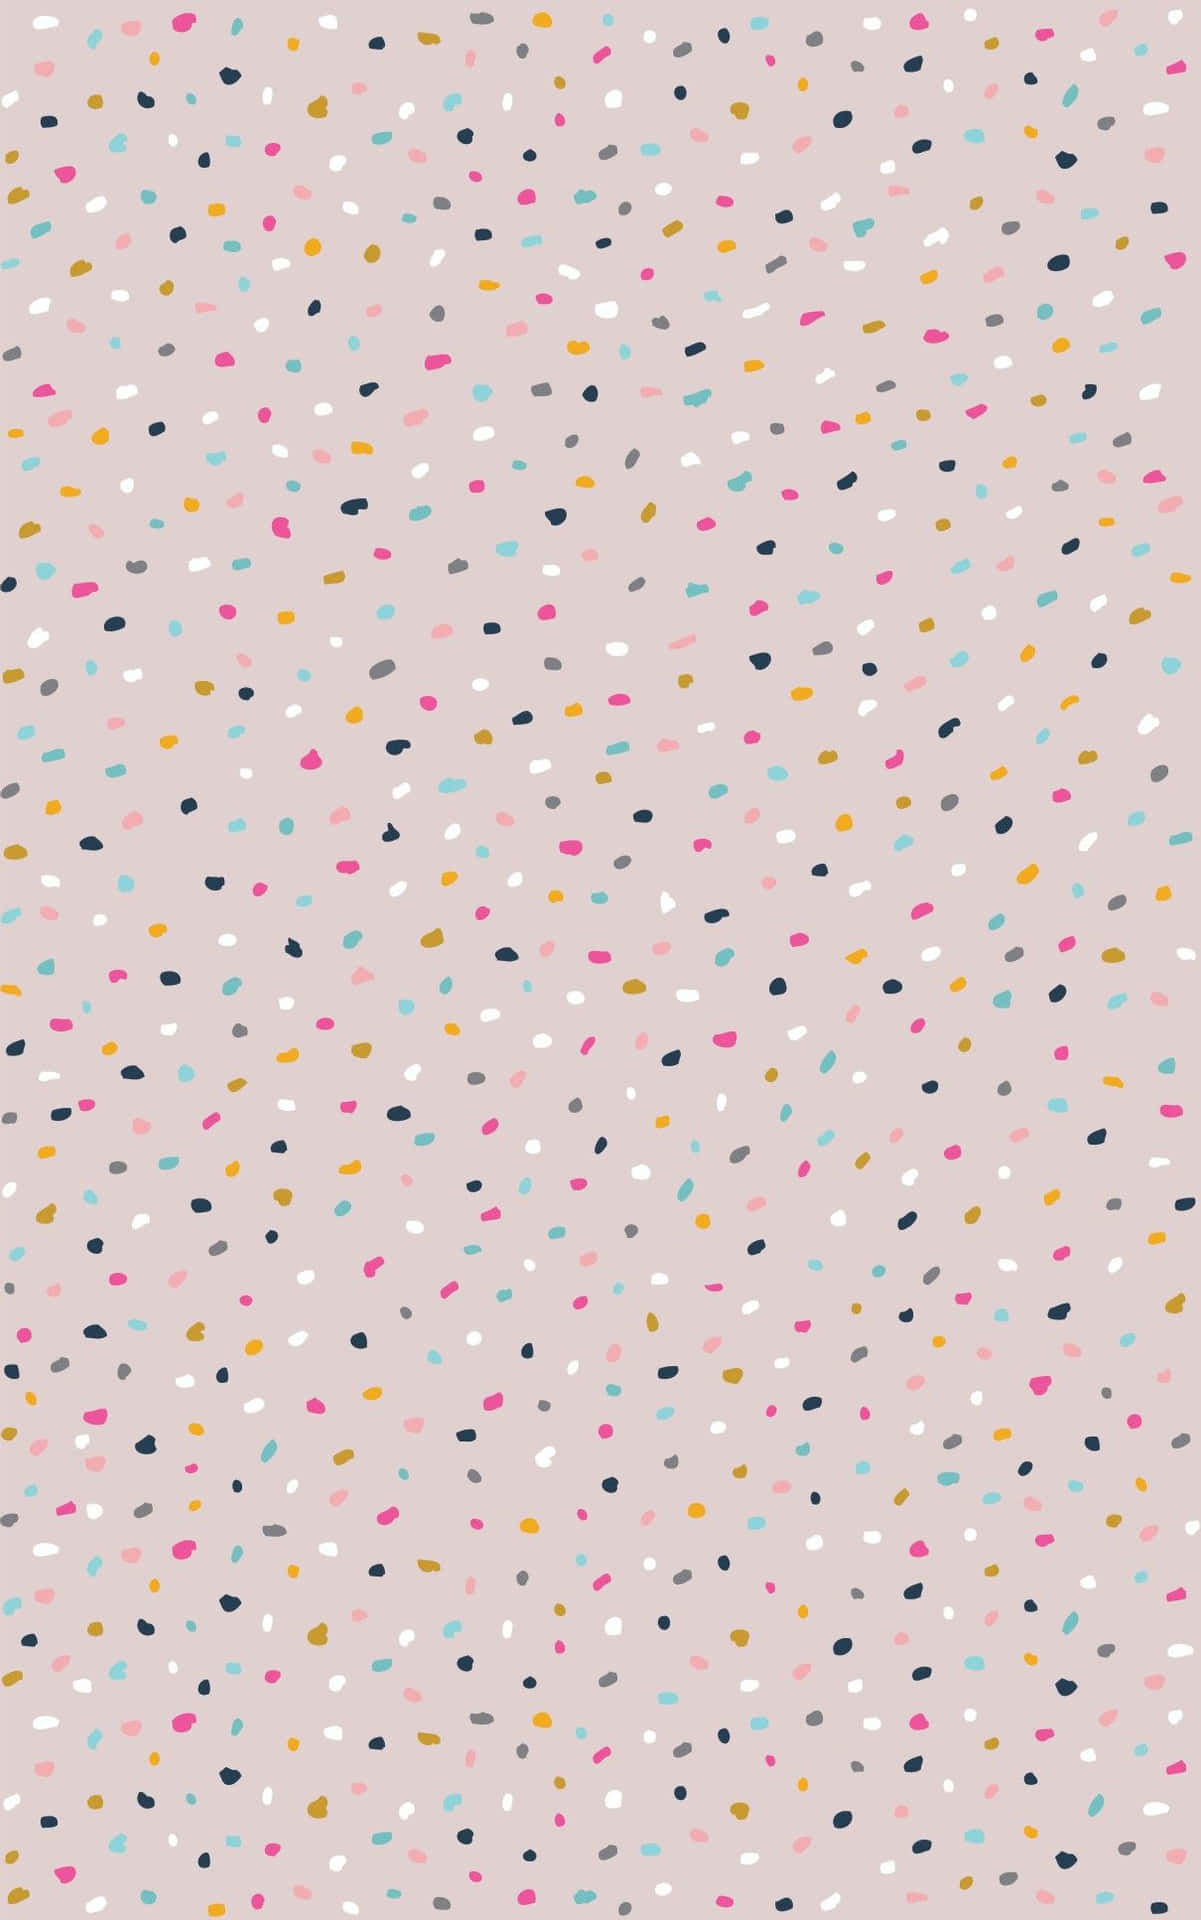 Simple Party Confetti Pattern iPhone Wallpaper